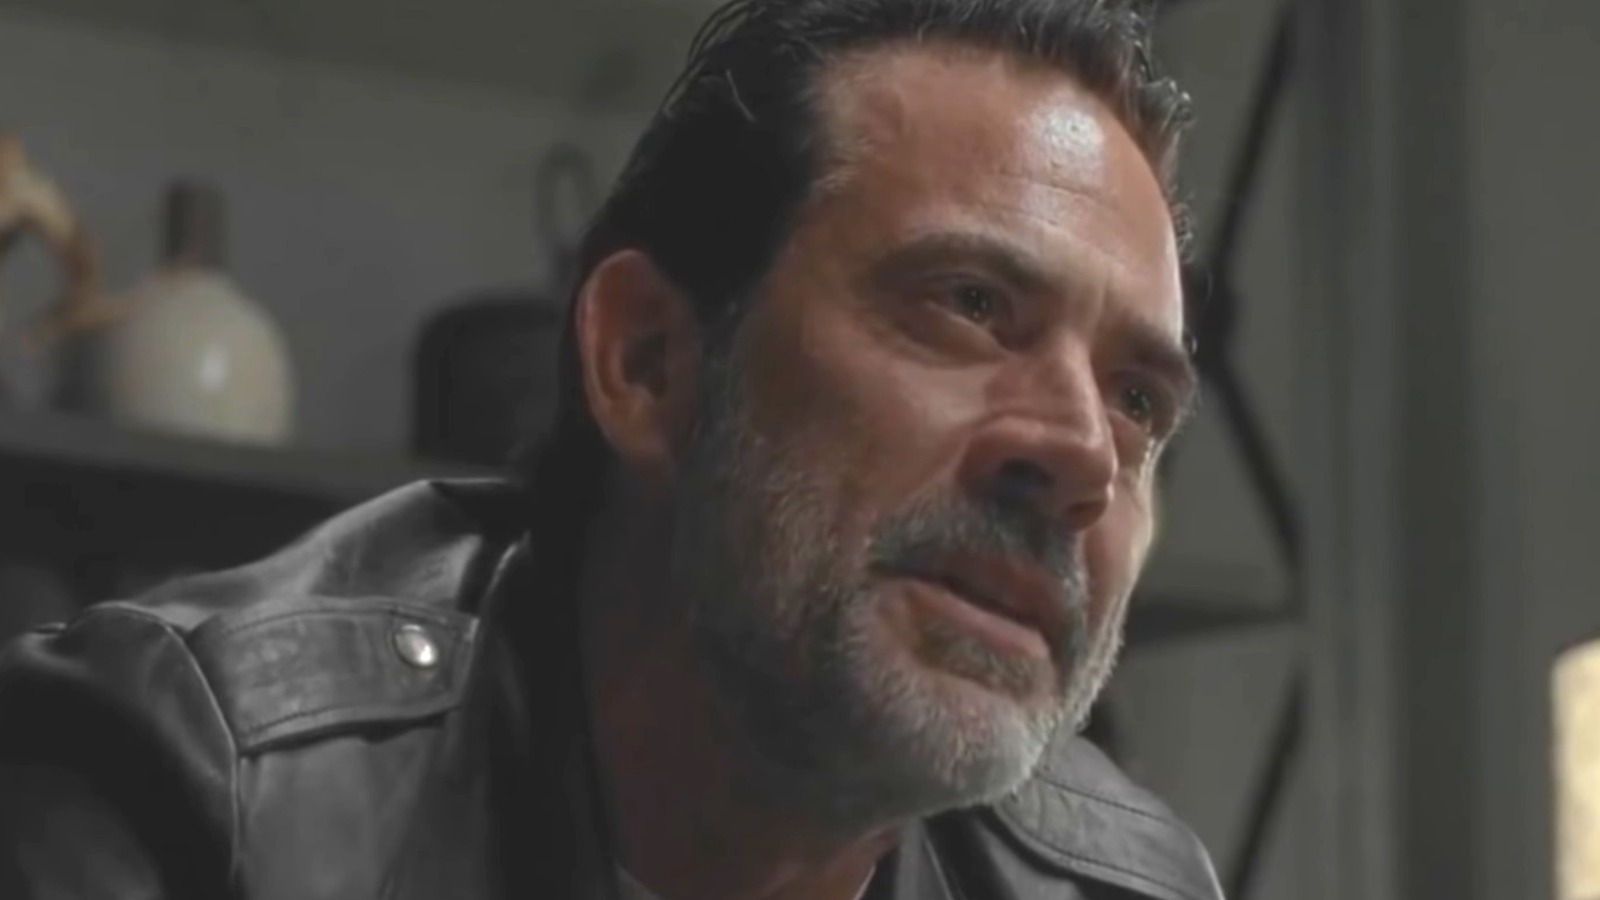 How This Walking Dead Actor Really Feels About His Character Being